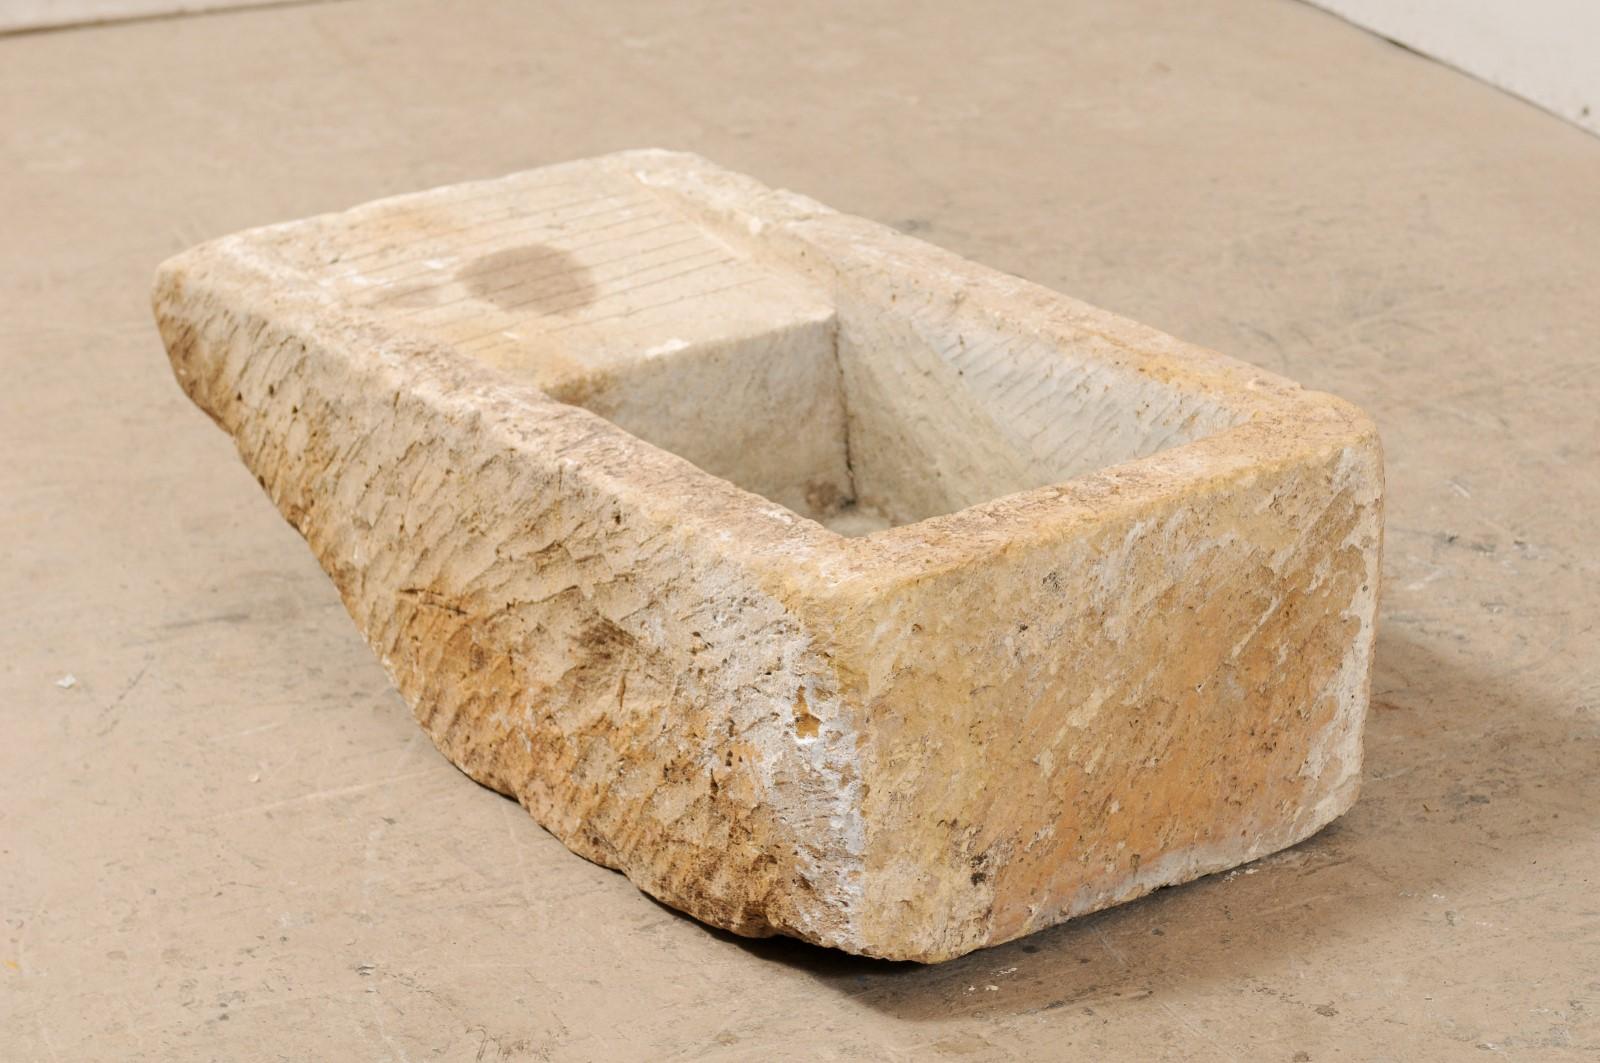 A European large stone sink with side drainboard from the 19th century. This antique sink from Europe has an overall rectangular shape and has been hand carved from a single piece of stone. One side of the sink has a drainboard, which tilts into the